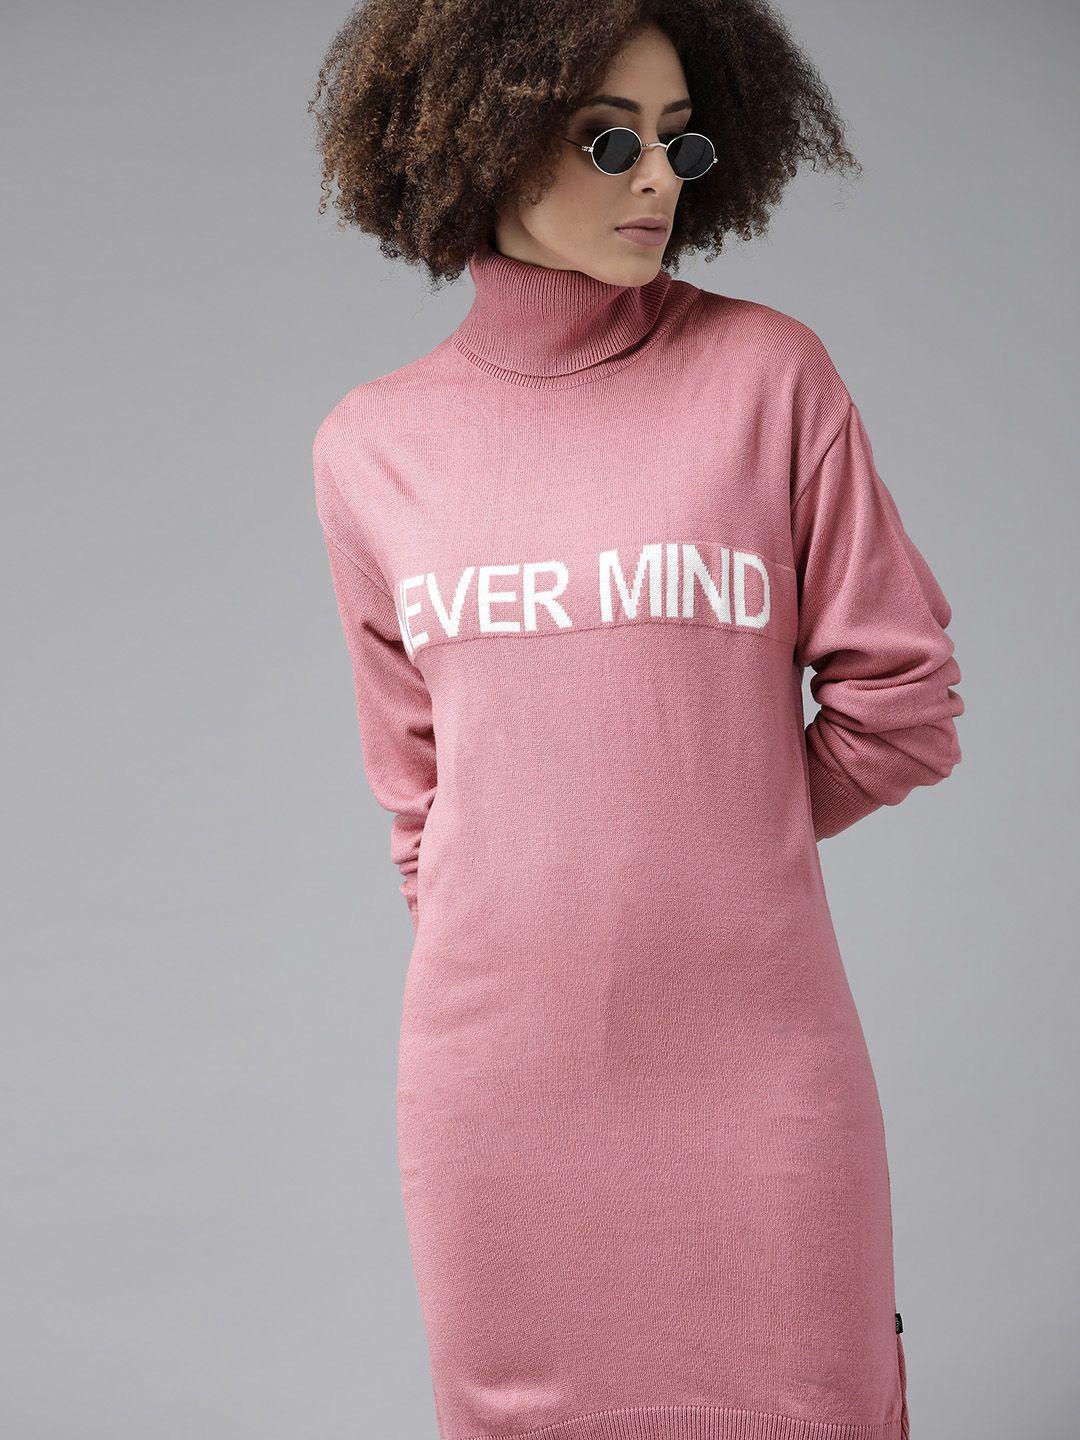 roadster dusty pink & white typography patterned knitted jumper dress